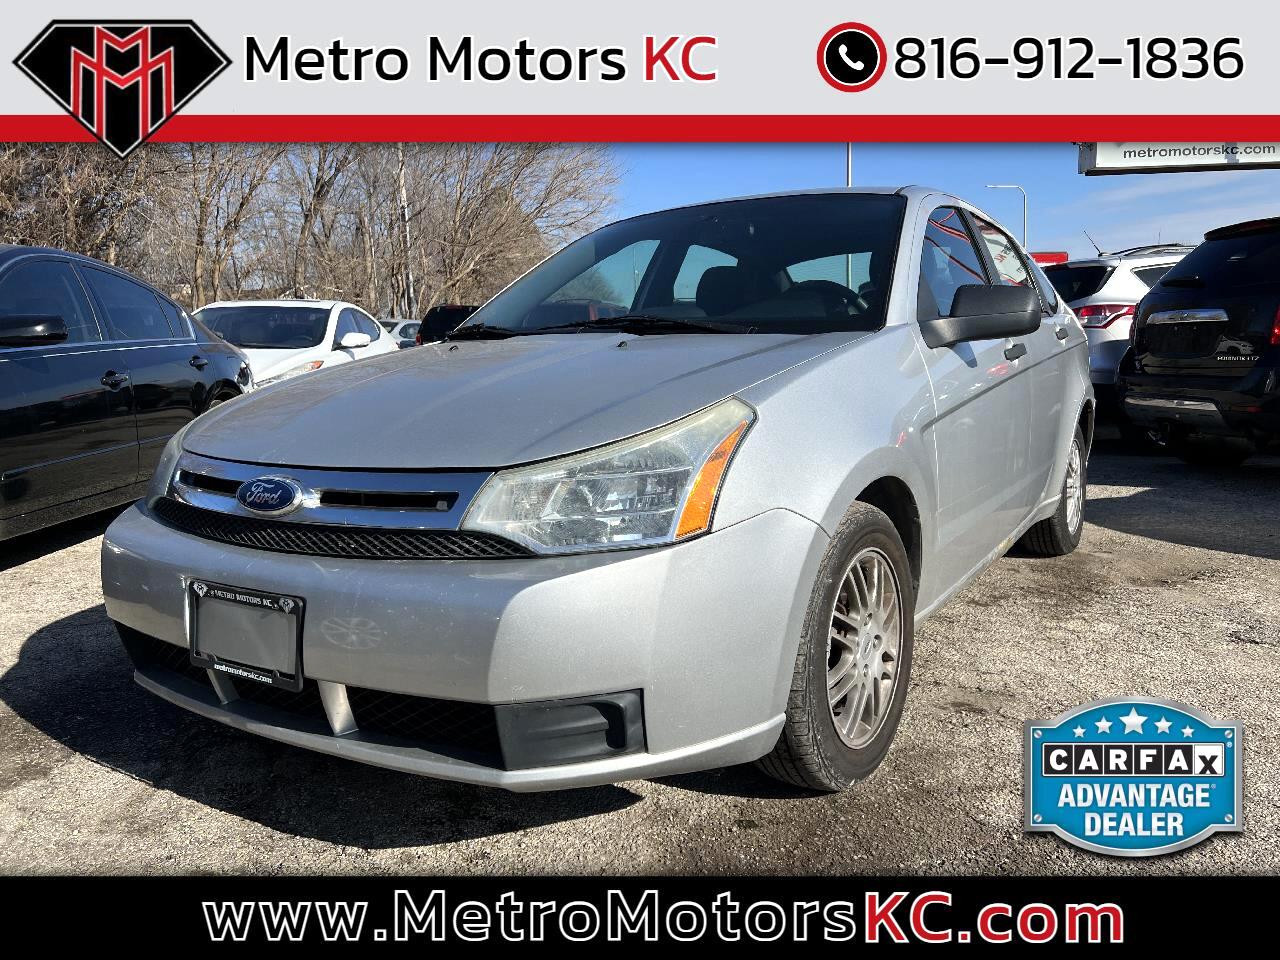 Used 2011 Ford Focus 4dr Sdn SE for Sale in Independence MO 64056 Metro  Motors KC